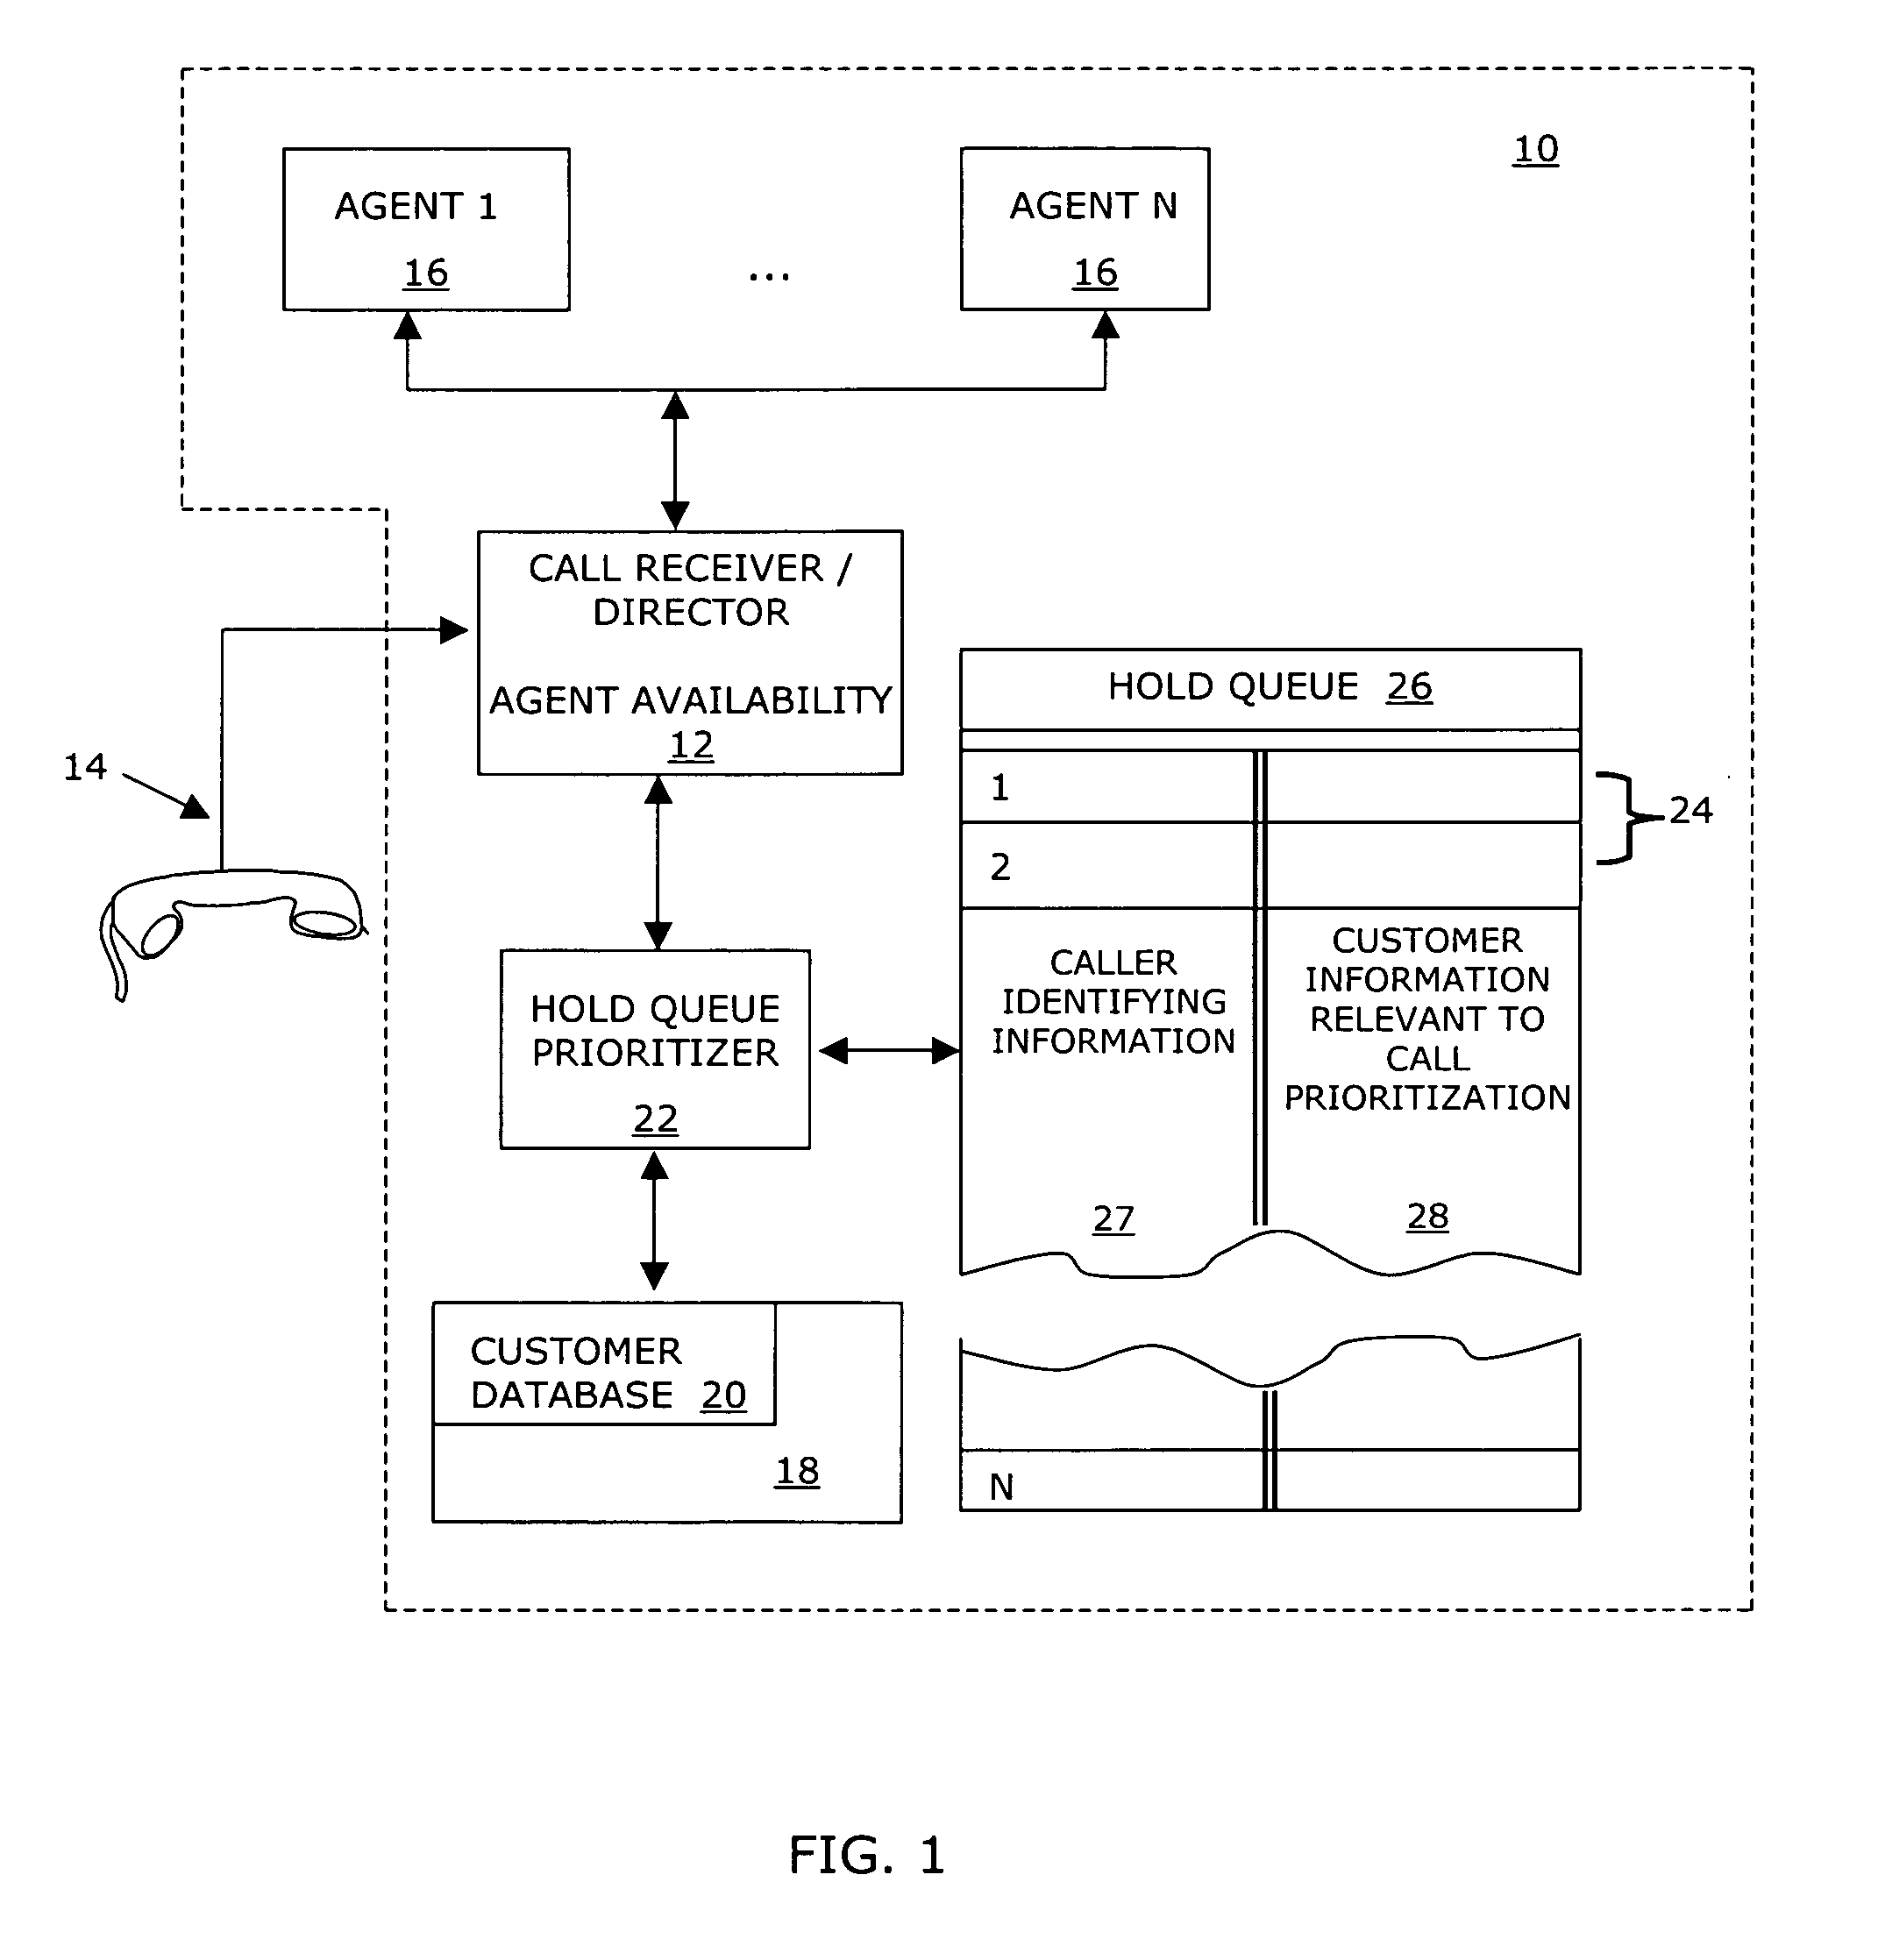 System and method for managing a hold queue based on customer information retrieved from a customer database